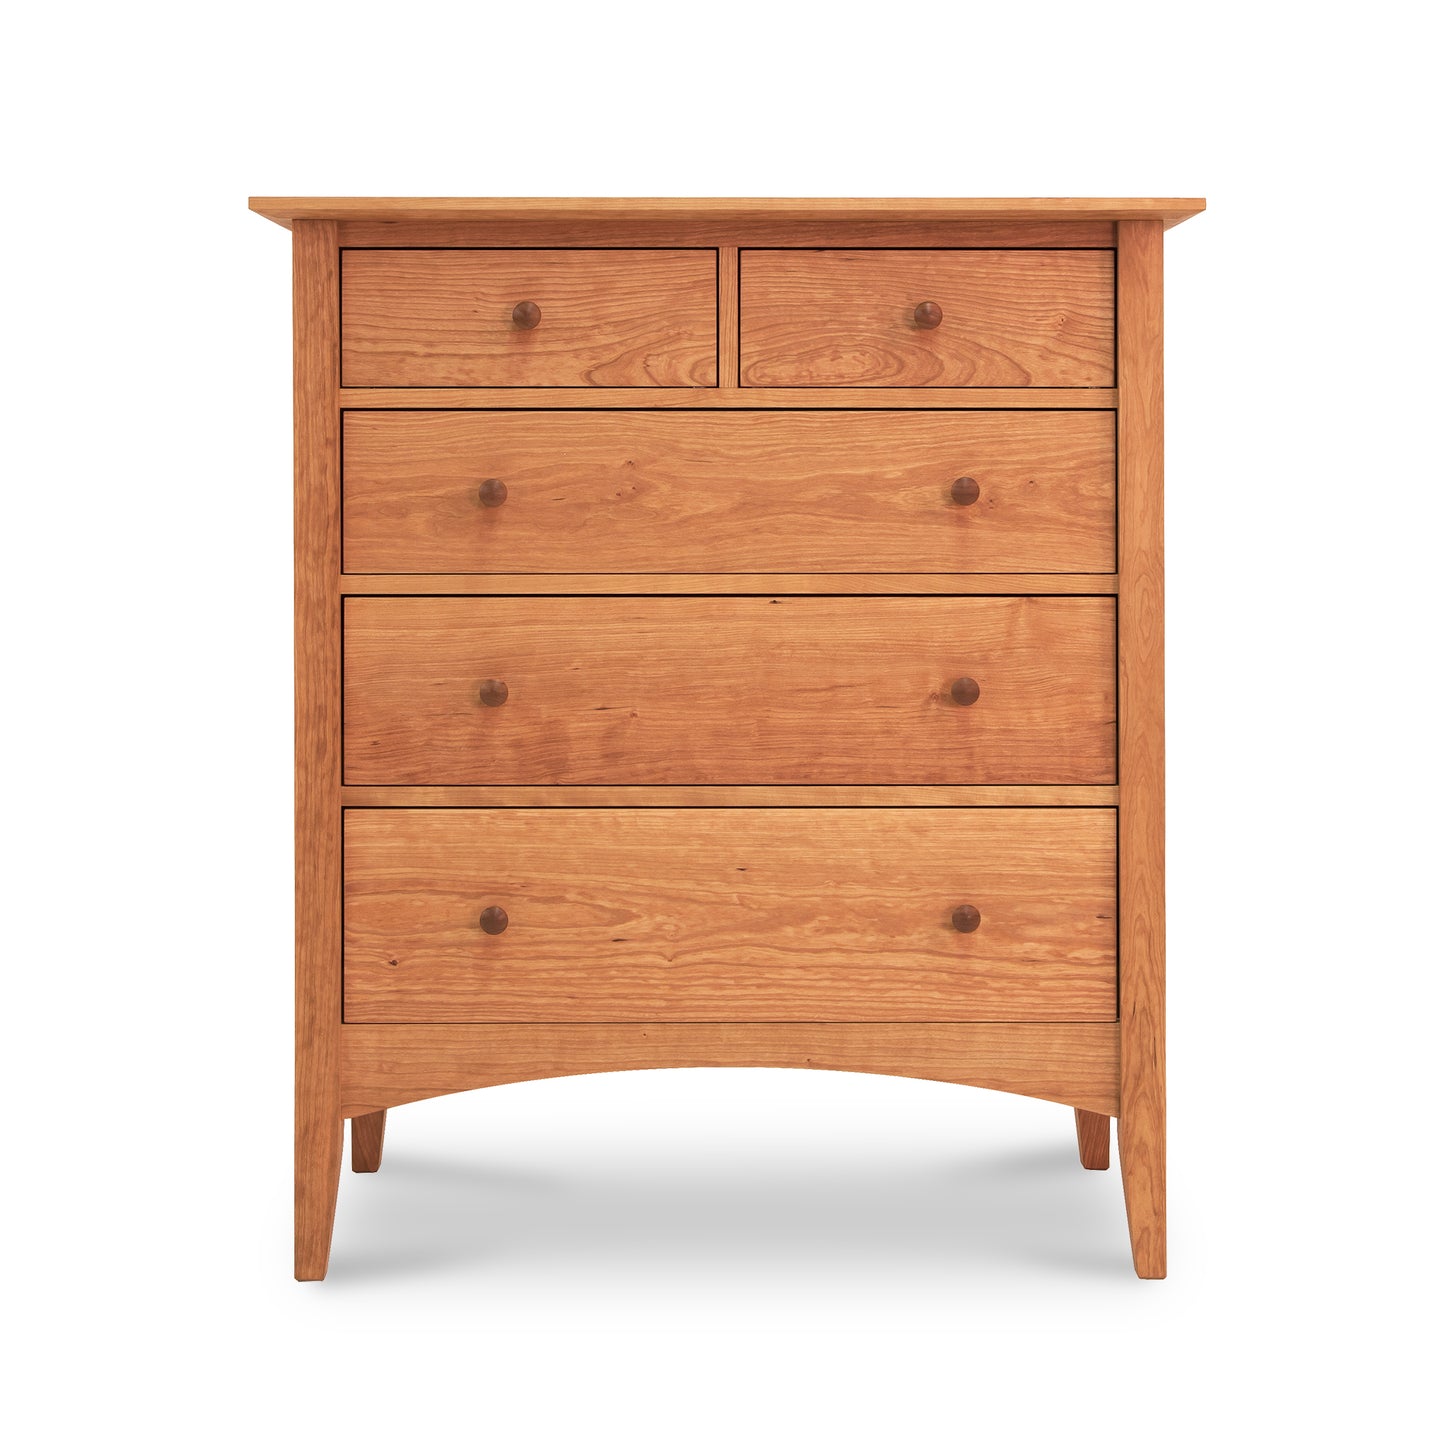 A Maple Corner Woodworks American Shaker 5-Drawer Chest crafted from sustainably harvested wood, with a natural finish and simple, round knobs, set against a plain white background. The dresser features a smaller split top drawer and four